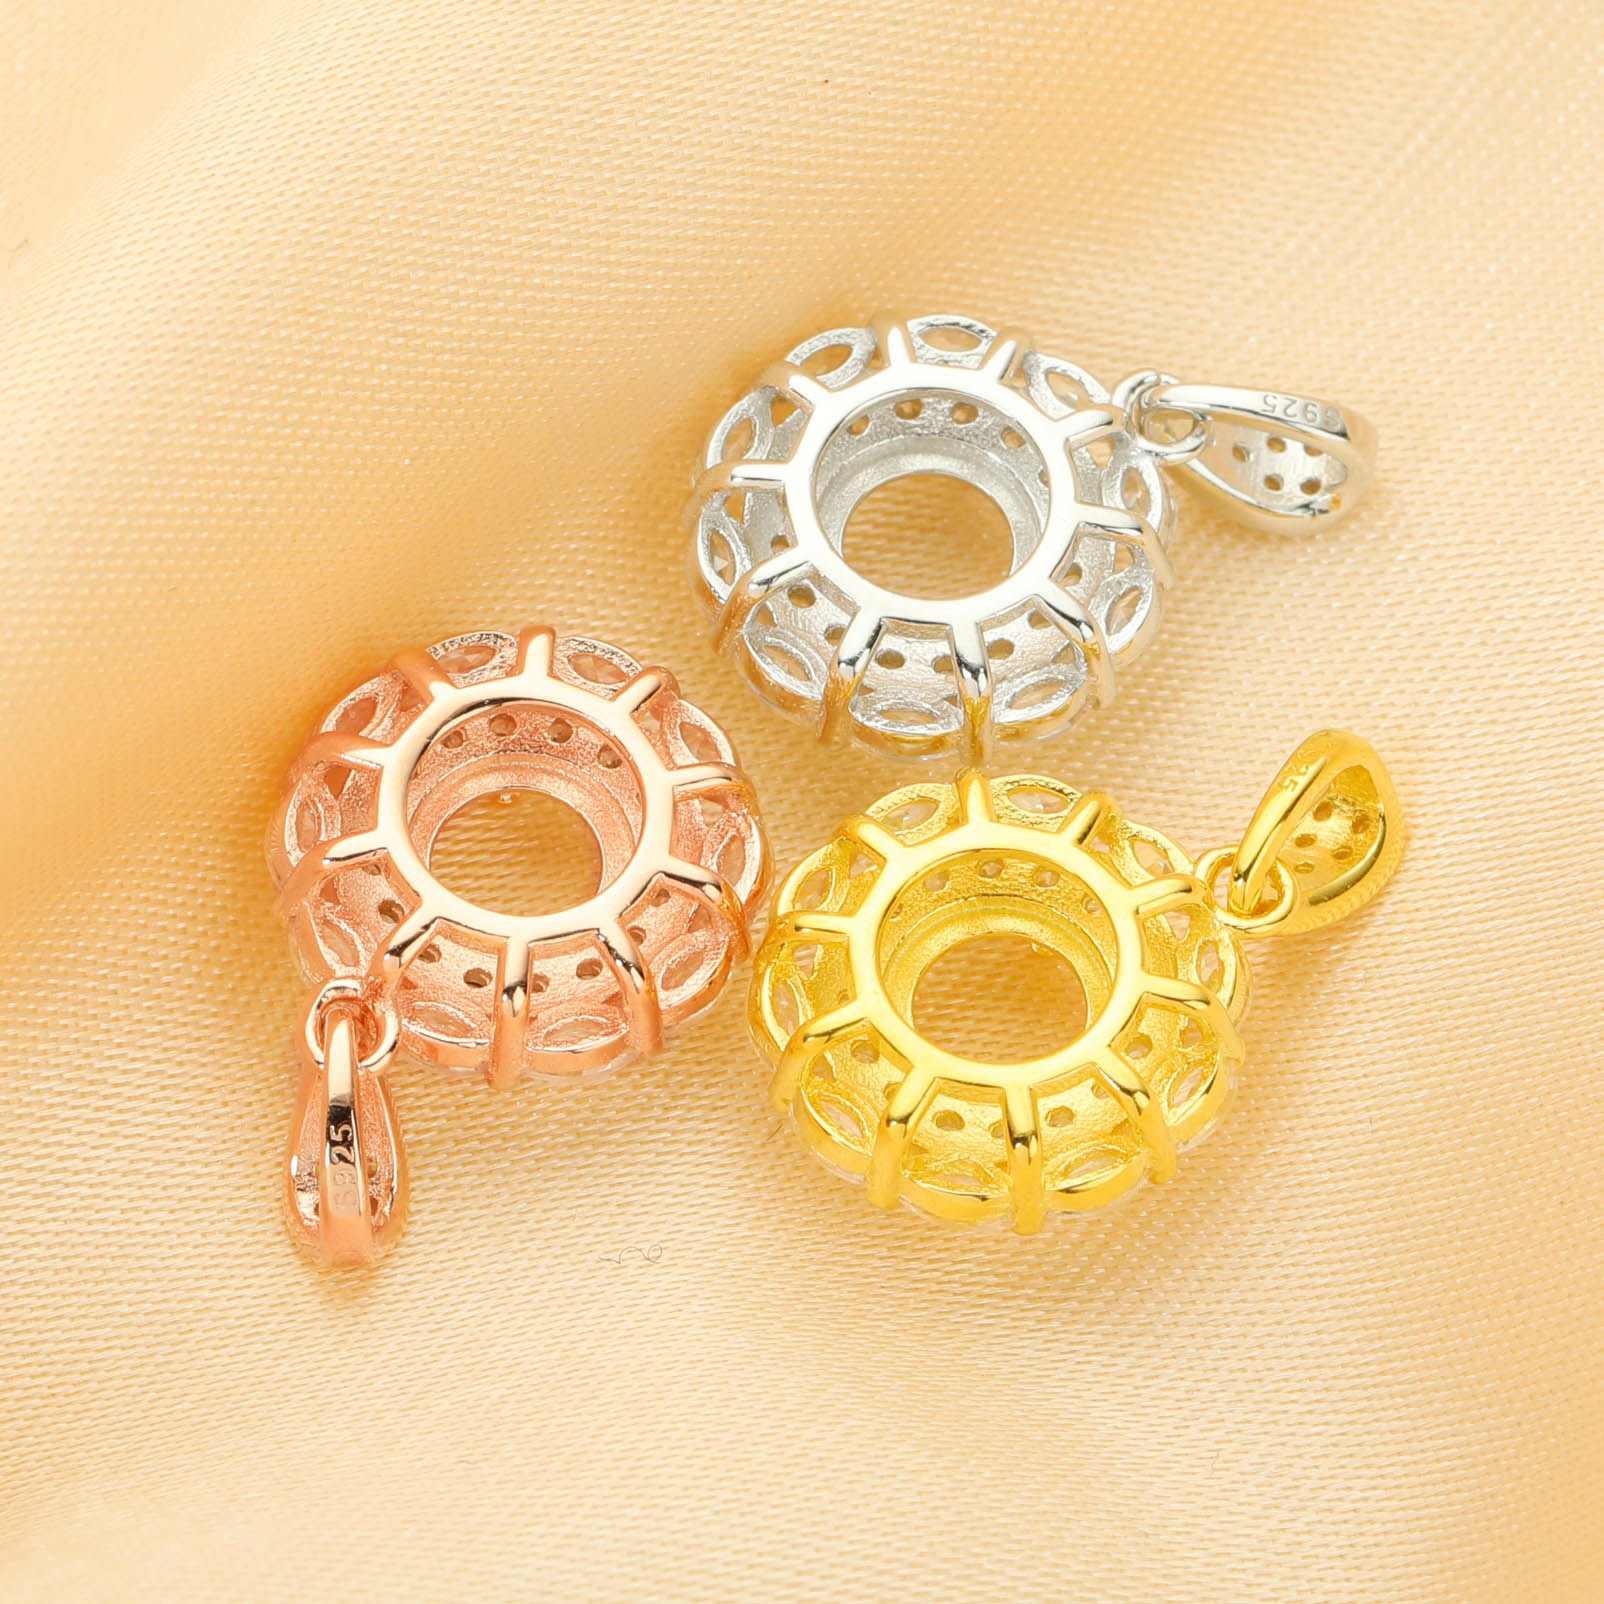 6MM Round Prong Pendant Settings,Flower Solid 925 Sterling Silver Rose Gold Plated Pendant Charm,Double Halo Flower CZ Stone Pendant 1411348 - Click Image to Close